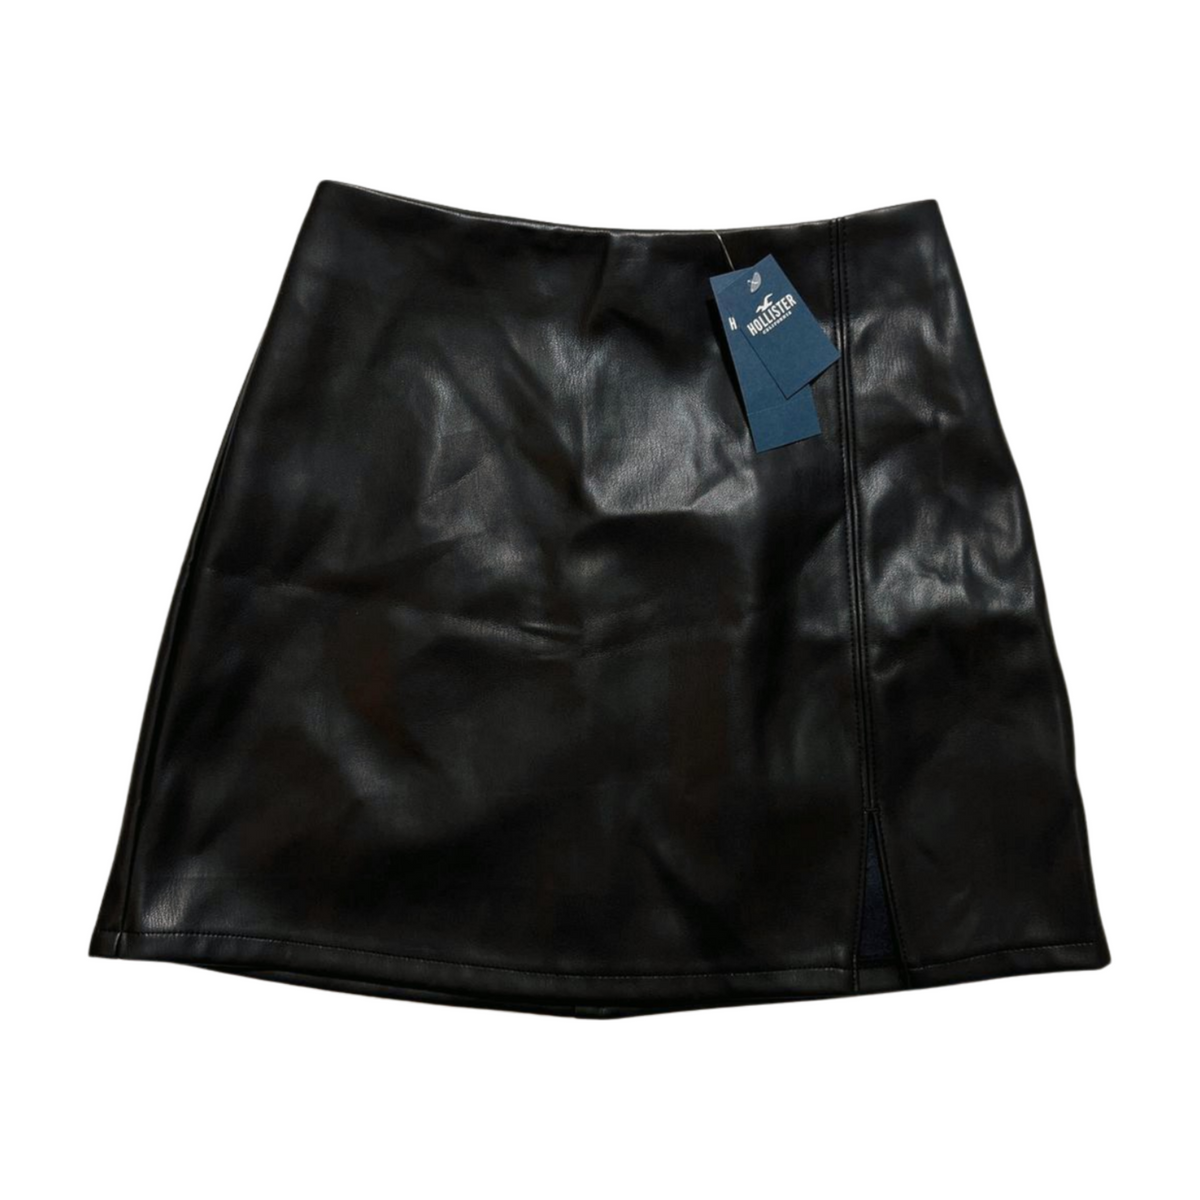 Hollister- Black Leather Mini Skirt NEW WITH TAGS!